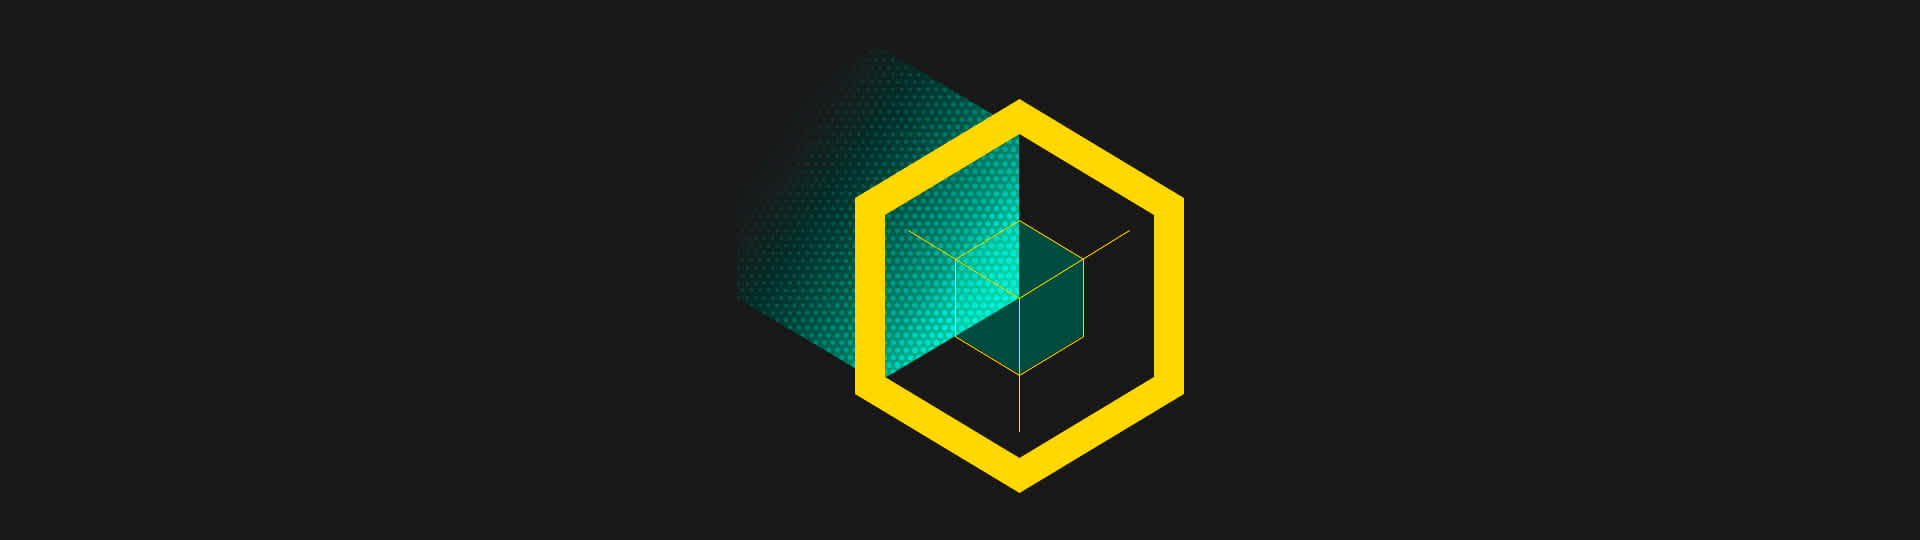 teal and yellow hexagonal shapes overlapping on a black background